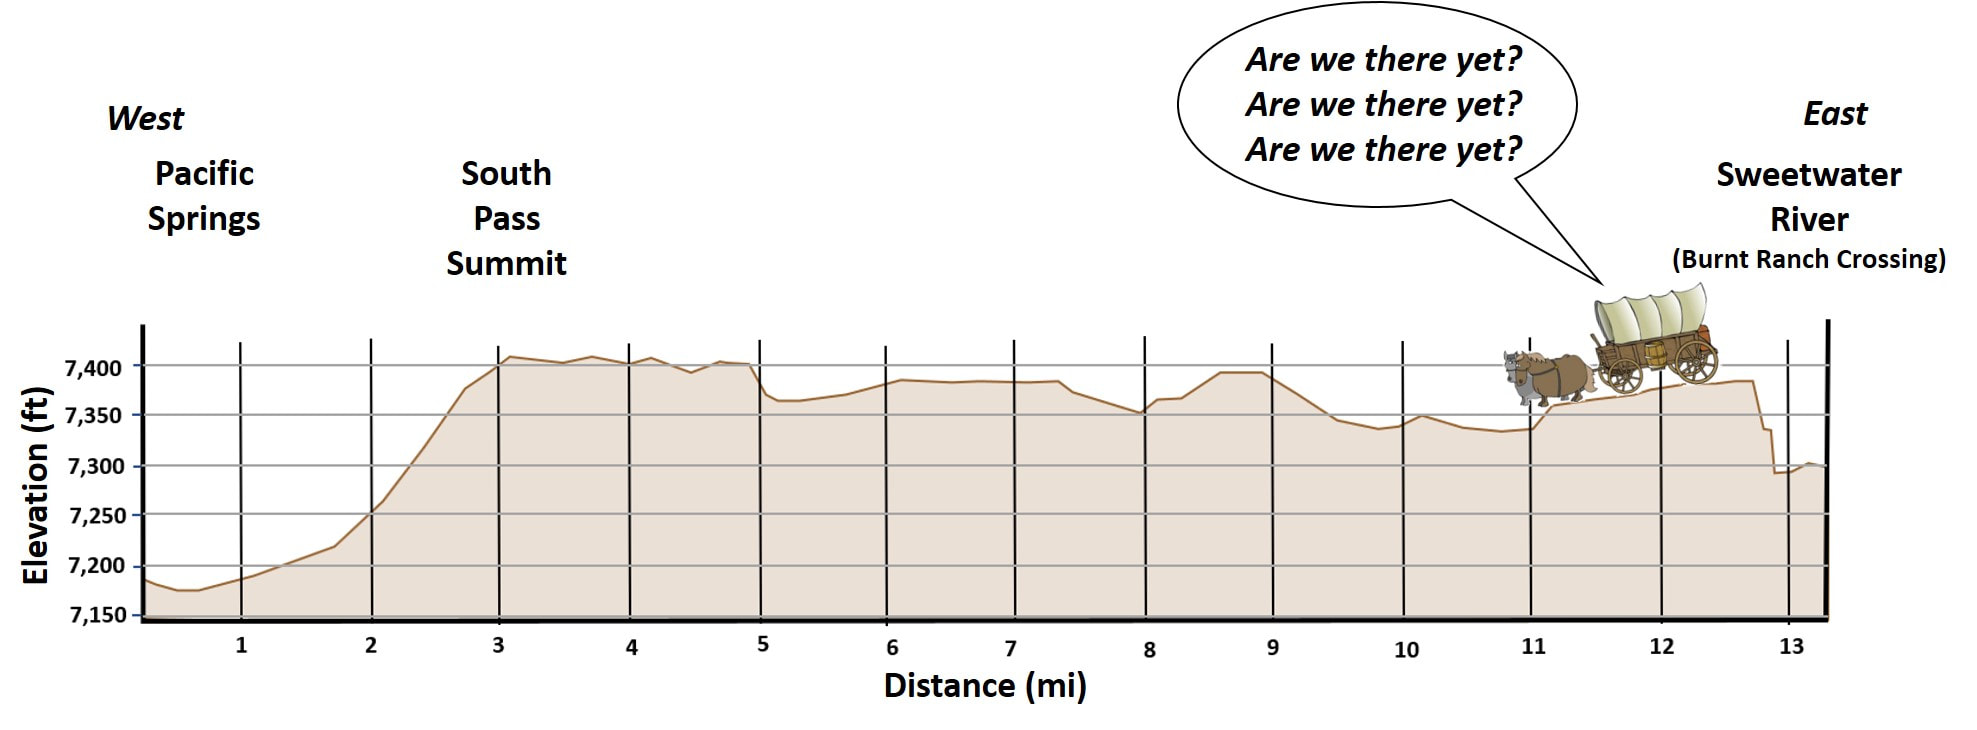 Elevation profile of South Pass, Wyoming